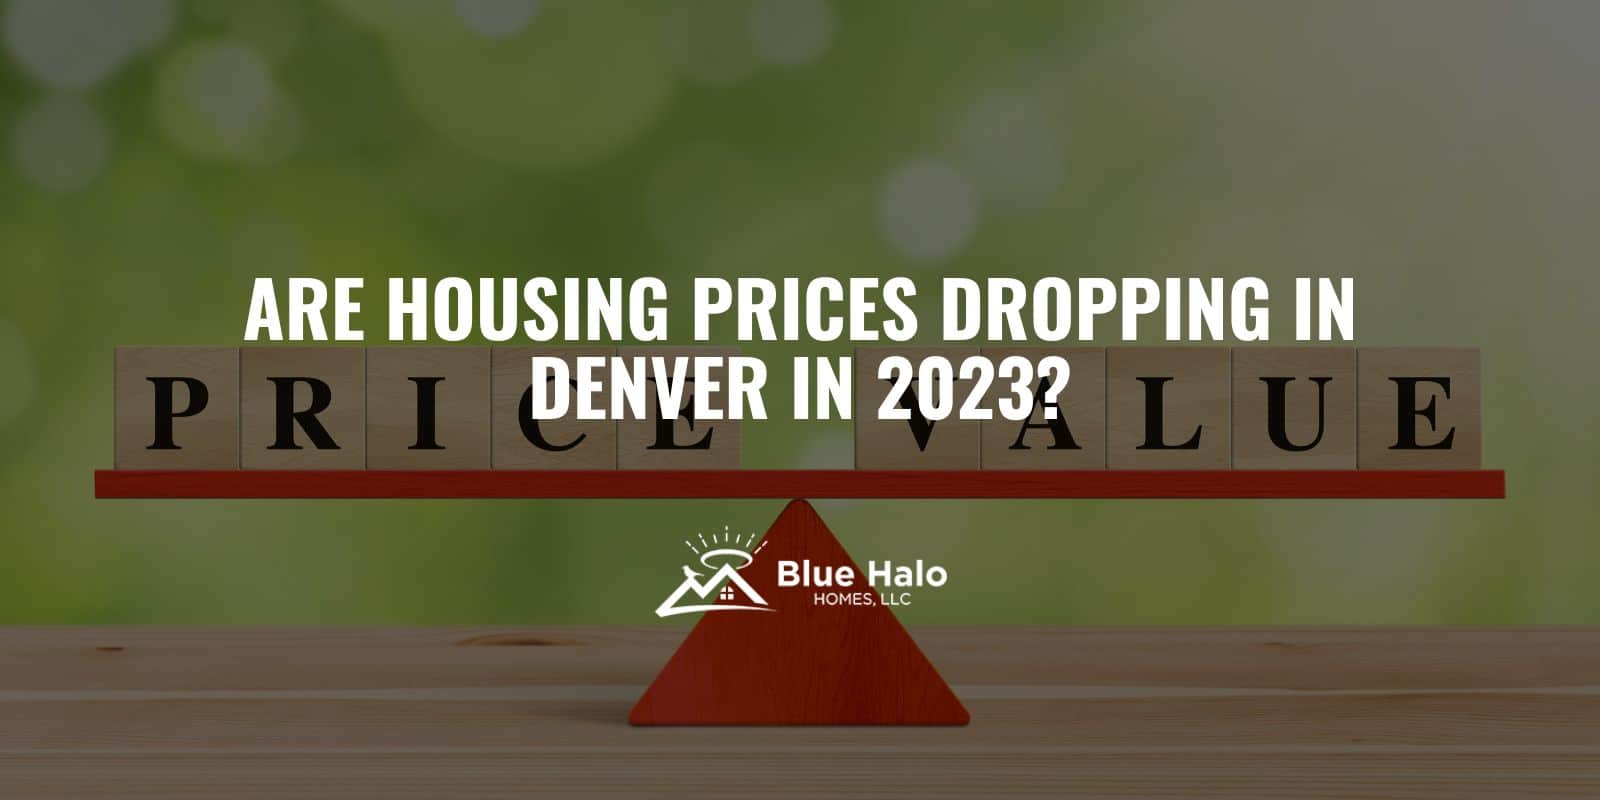 Are Housing Prices Dropping in Denver in 2023? Blue Halo Homes